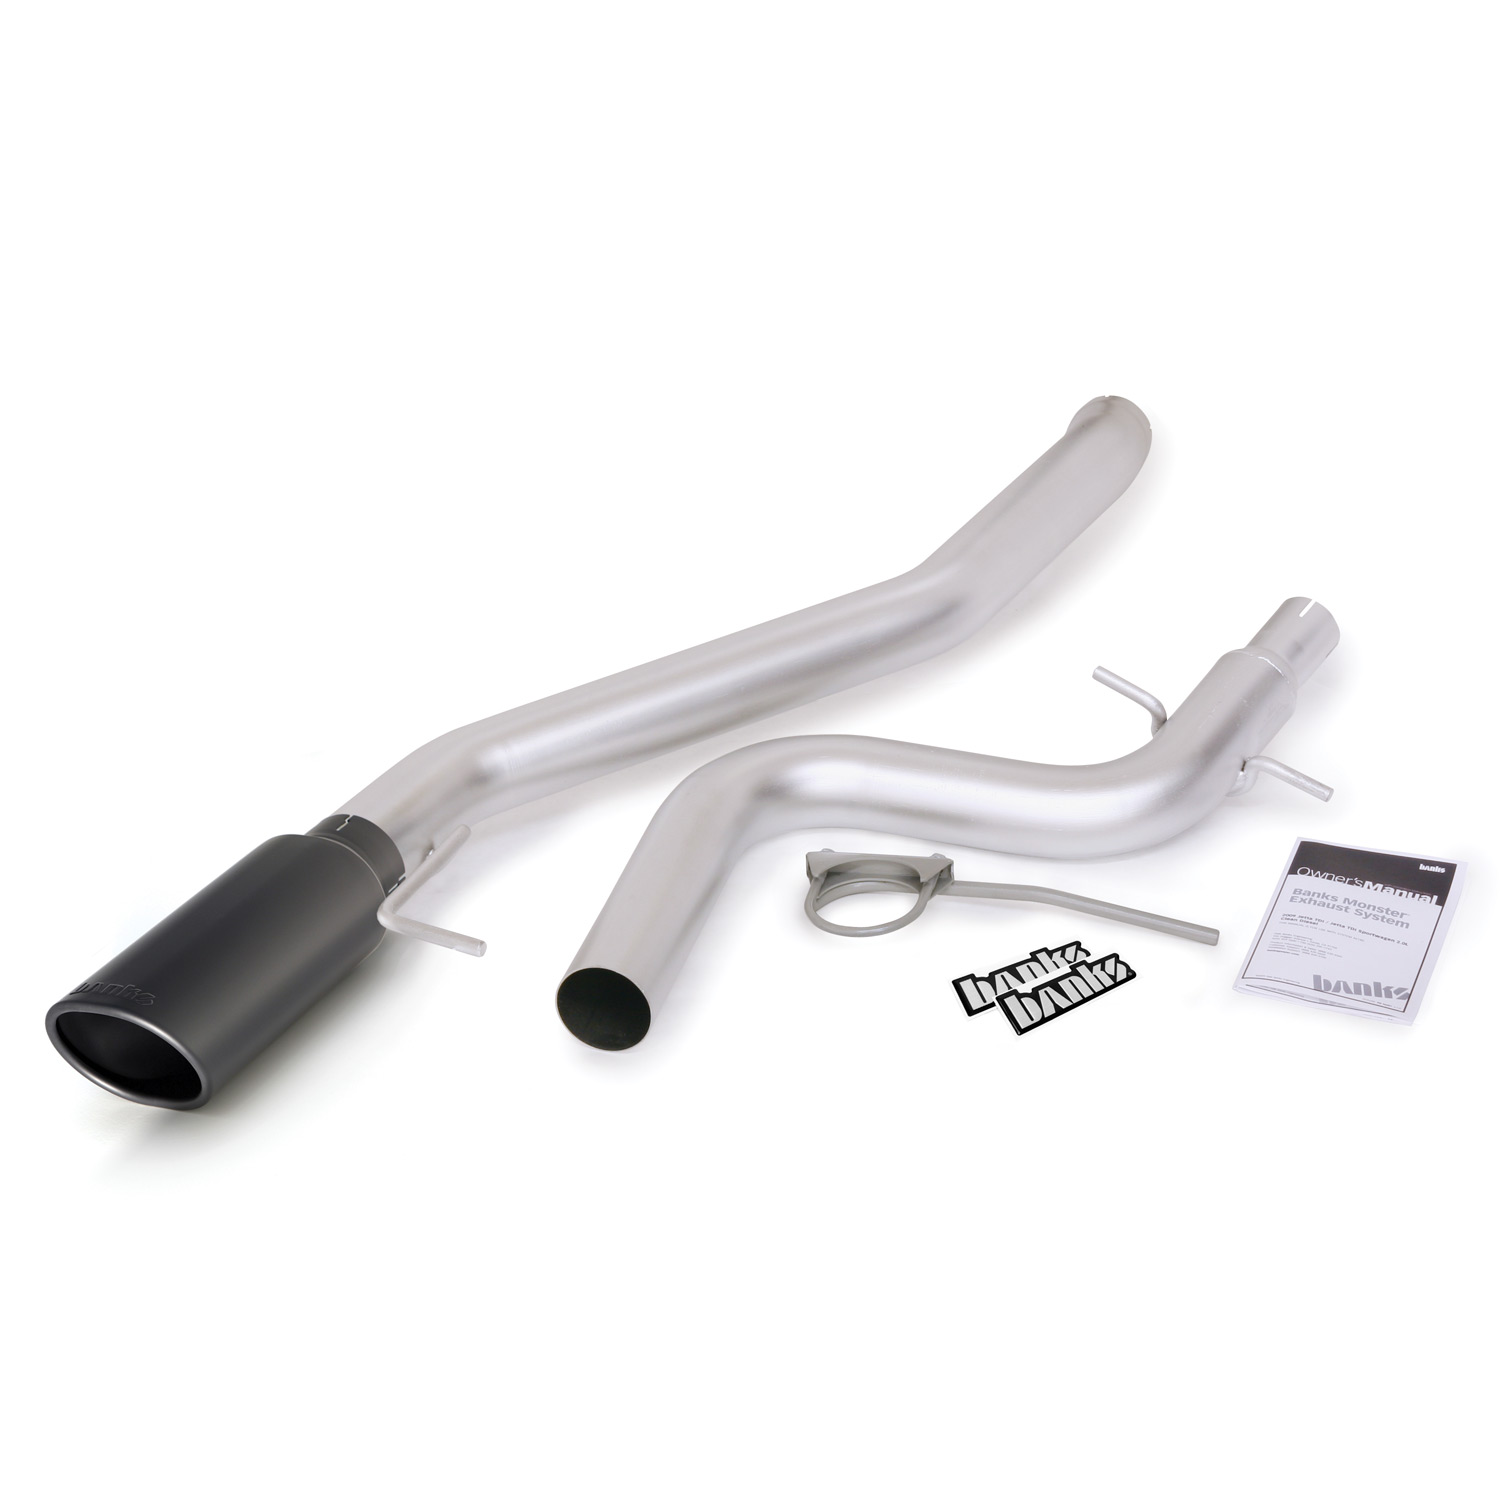 Performance Exhaust Systems for Trucks & Jeeps - Banks